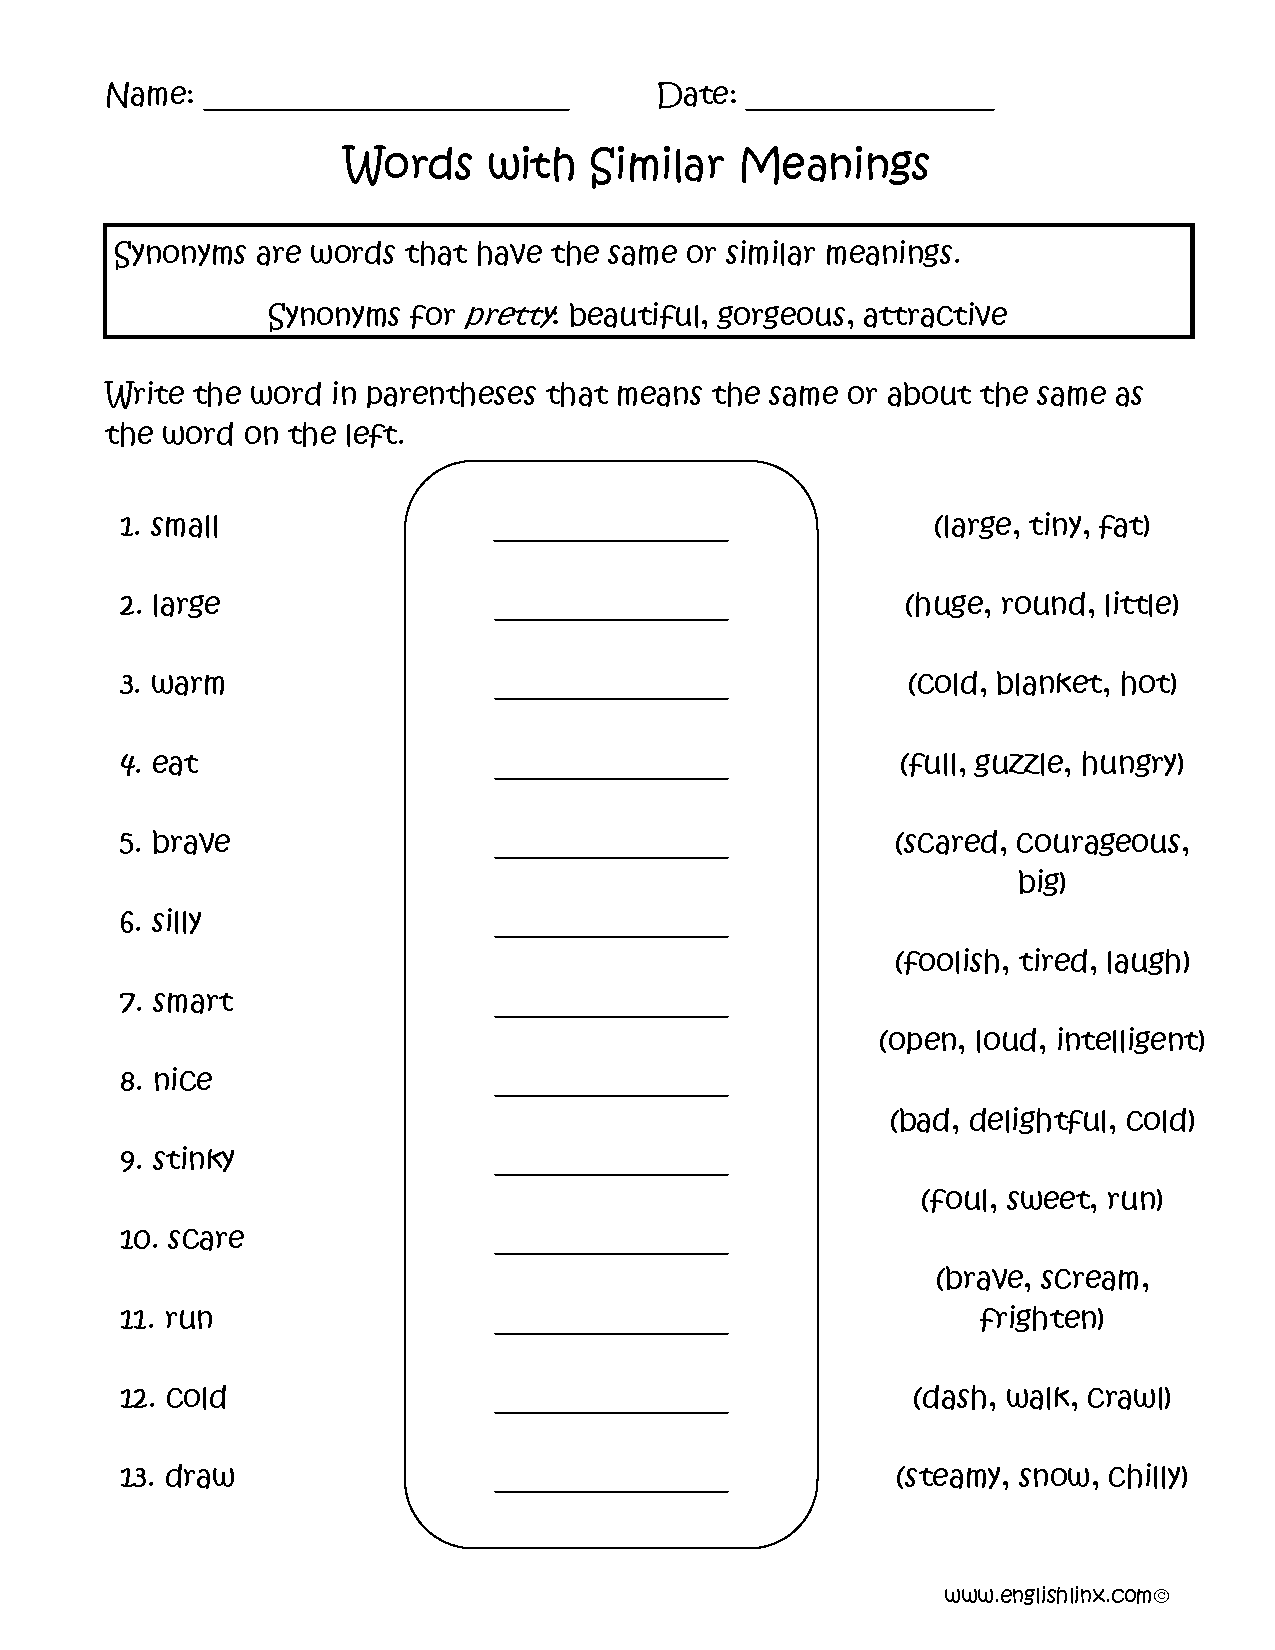 Similar Words Synonyms Worksheets